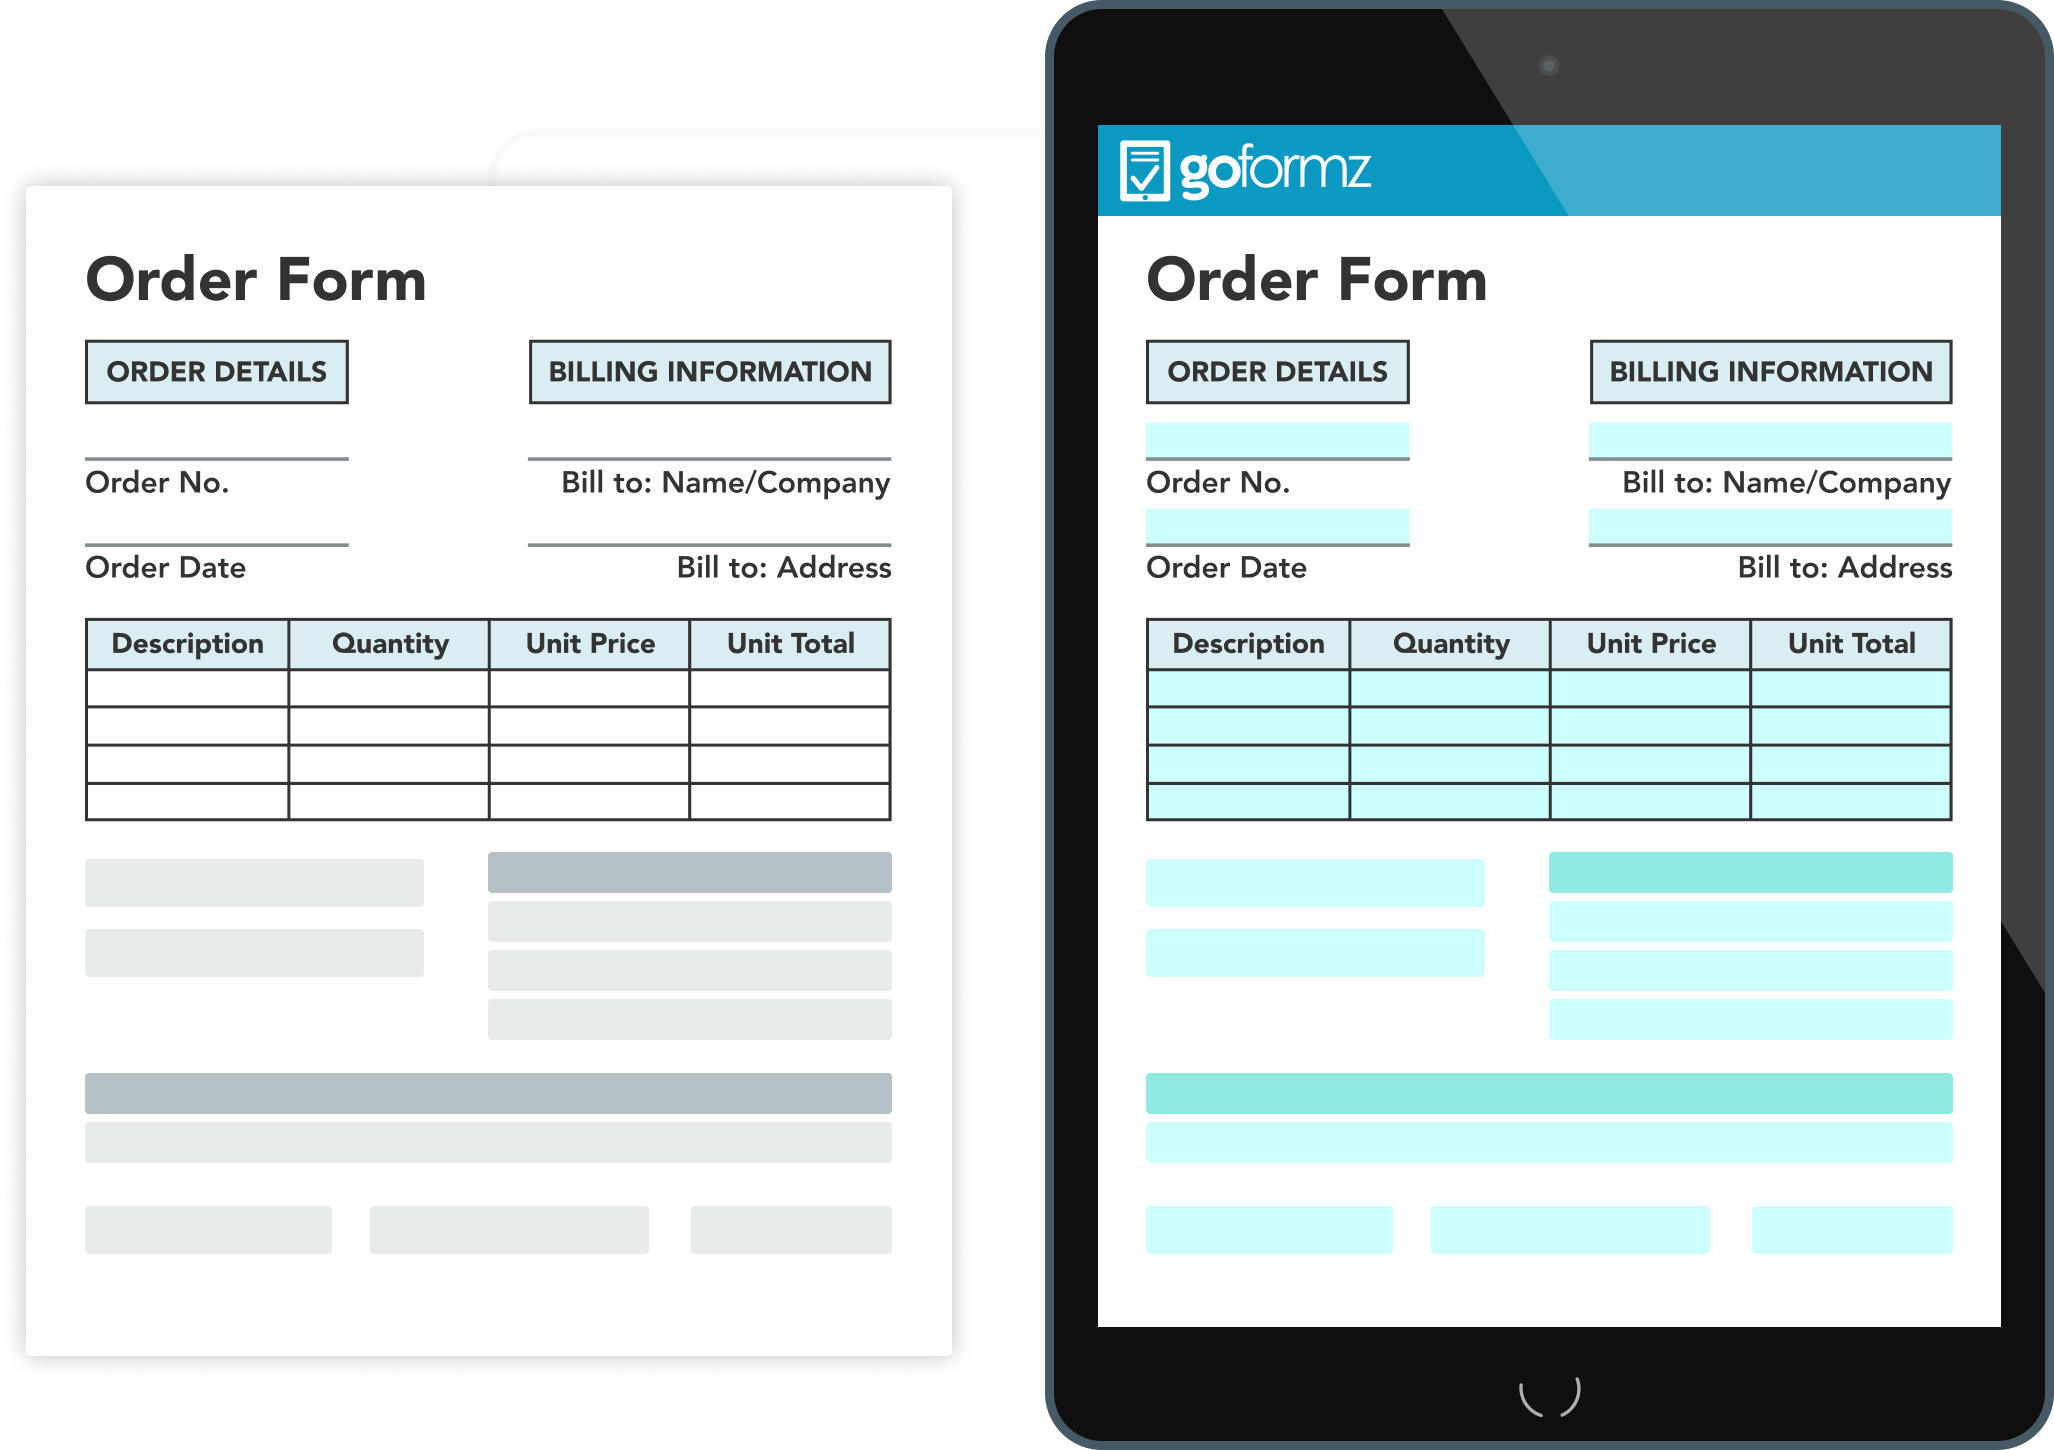 Completing your home inspection checklist is faster with digital forms